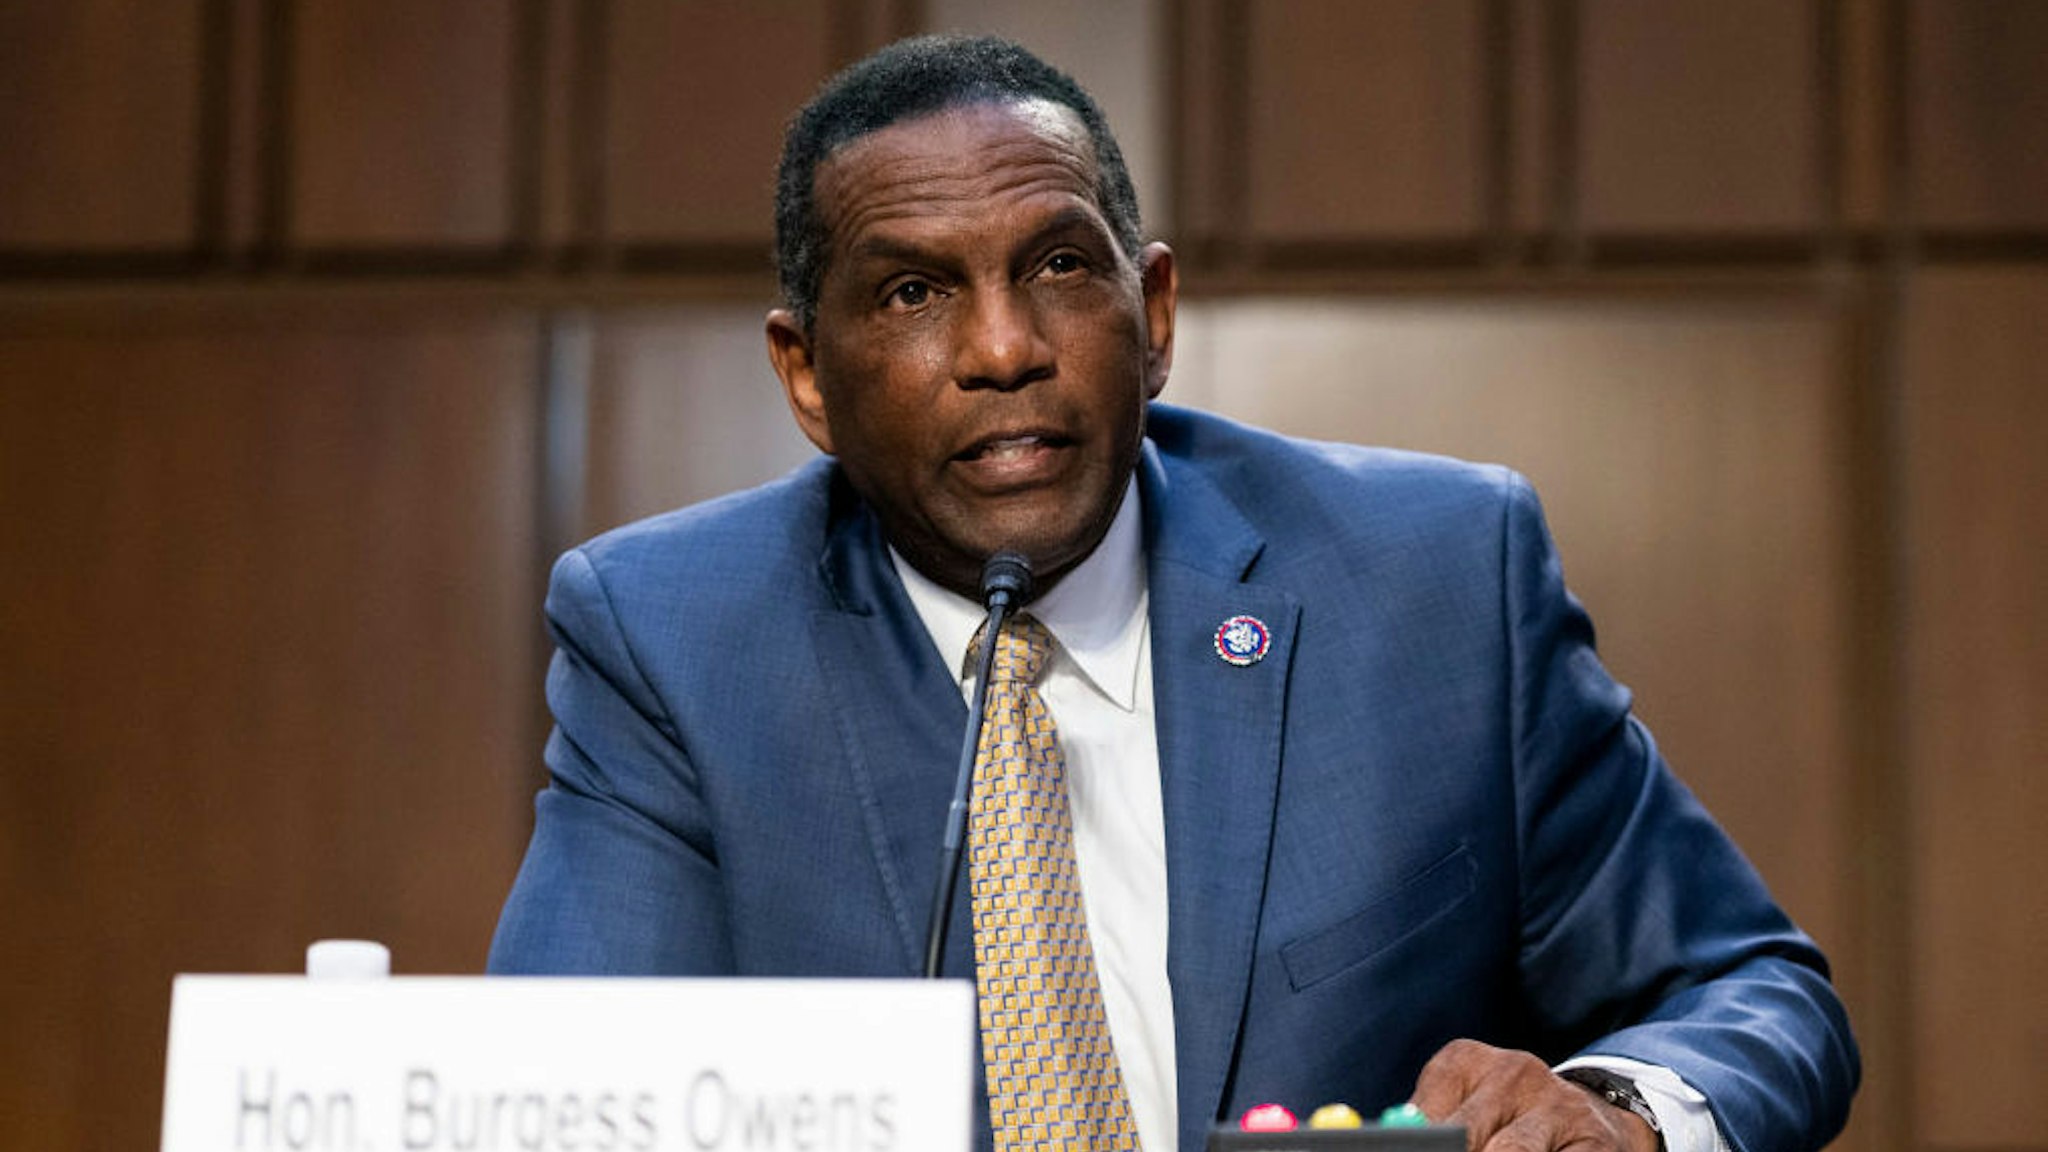 UNITED STATES - APRIL 20: Rep. Burgess Owens, R-Utah, speaks during the Senate Judiciary Committee hearing on Jim Crow 2021: The Latest Assault on the Right to Vote on Tuesday, April 20, 2021. (Photo By Bill Clark/CQ-Roll Call, Inc via Getty Images)